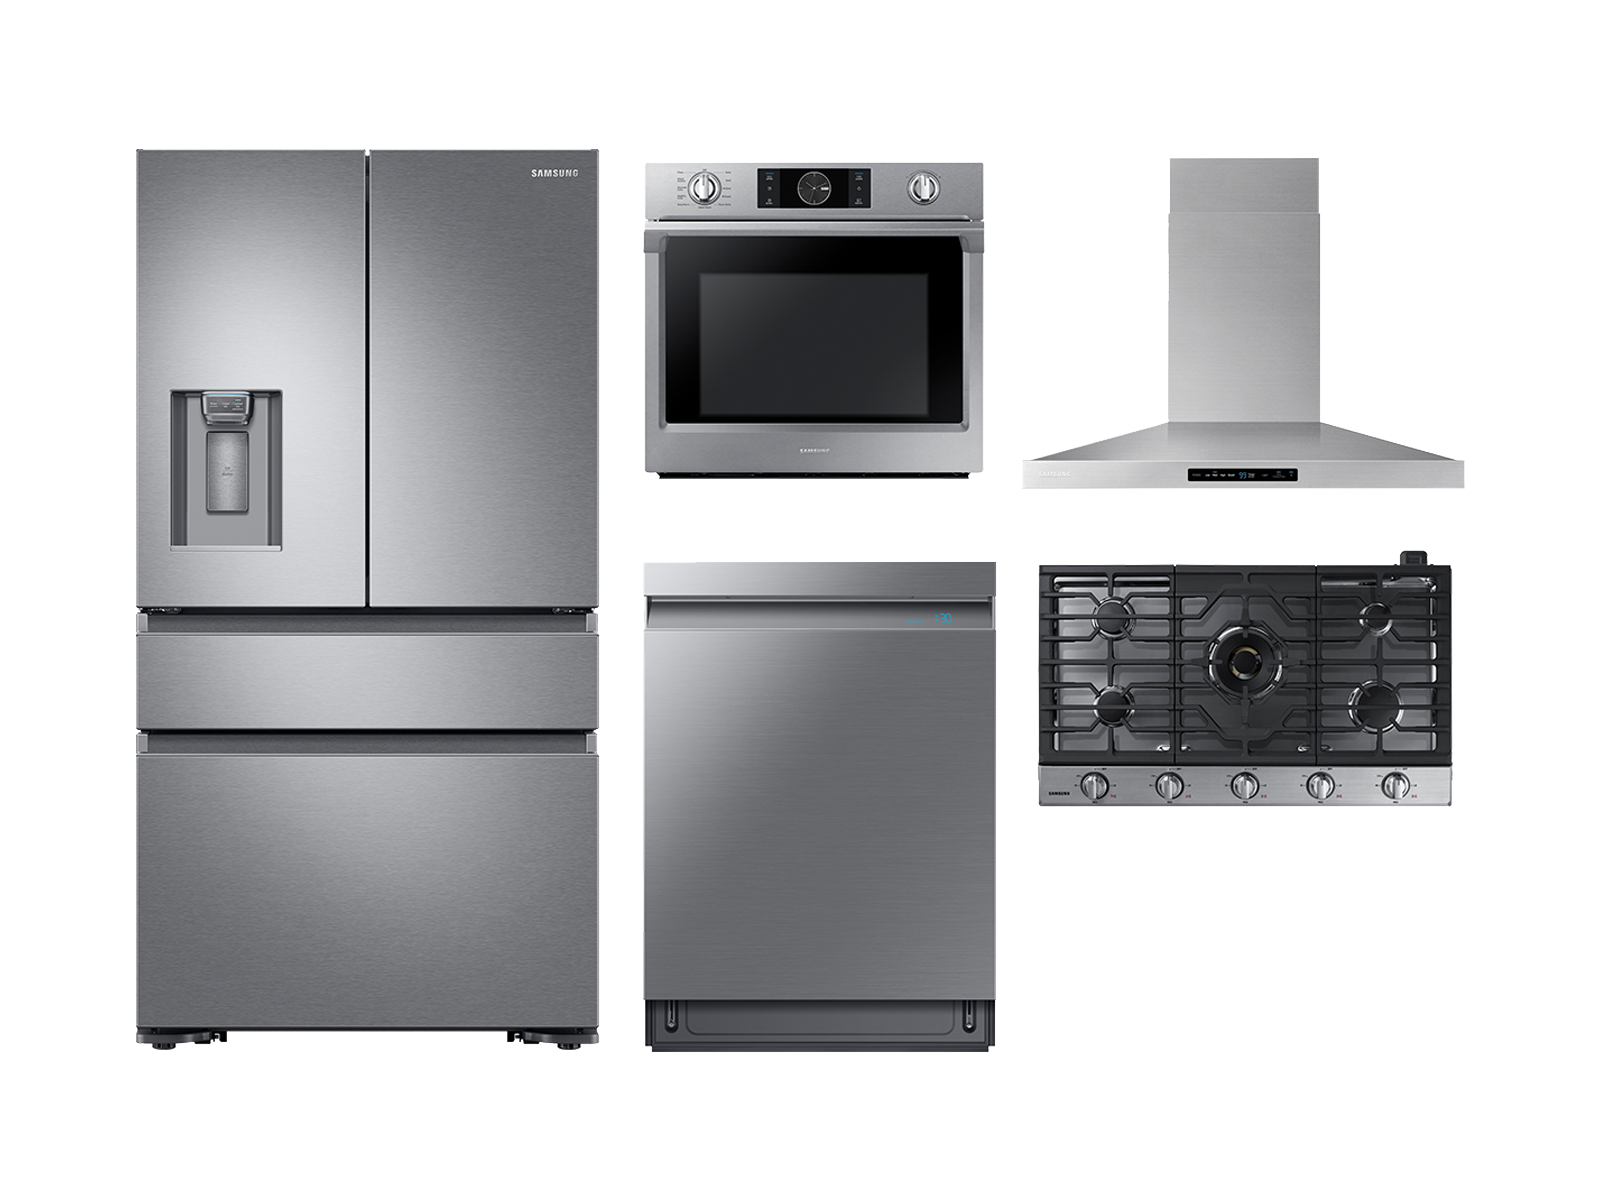 4-door Refrigerator + Single Wall Oven + Gas Cooktop + Hood + Linear Wash Dishwasher in Stainless Steel